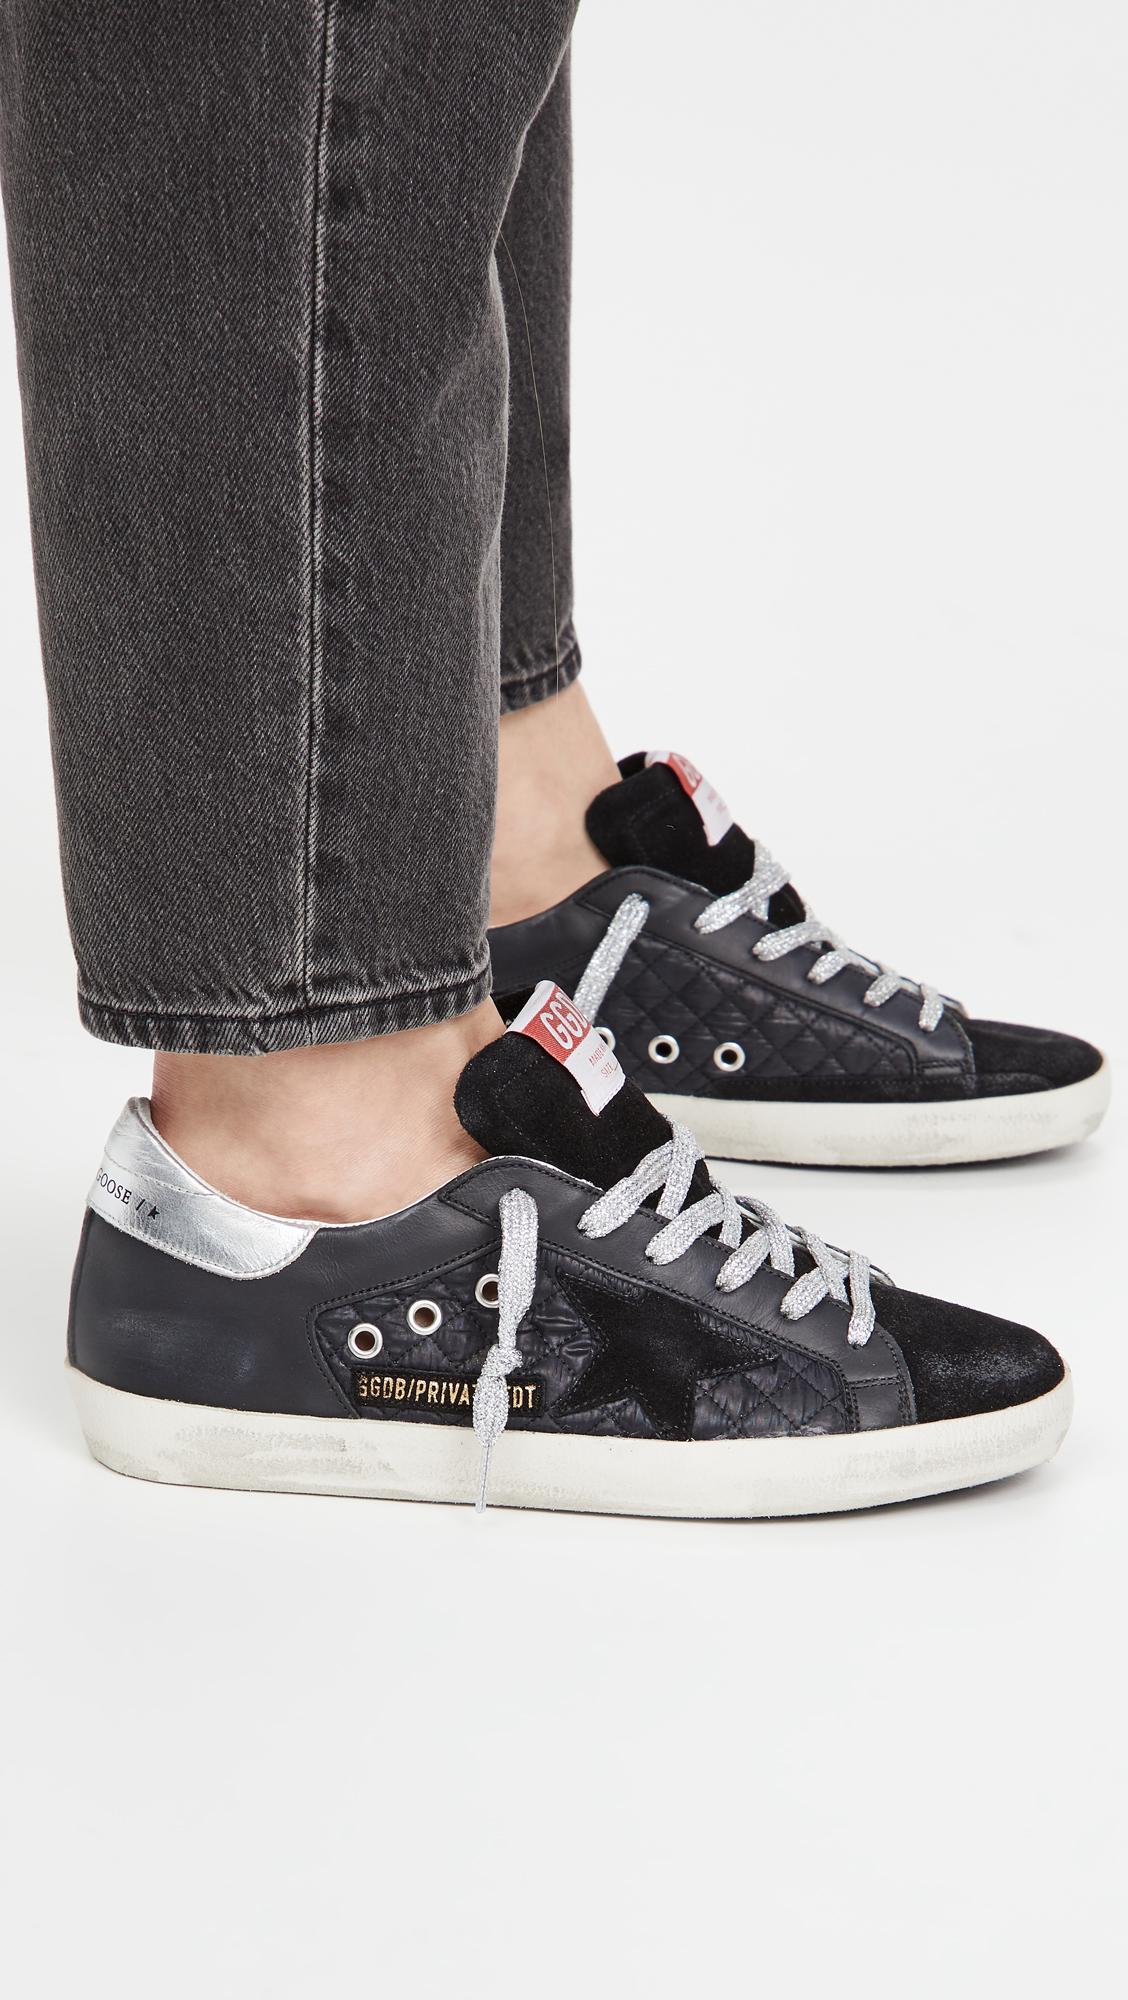 Golden Goose Leather Superstar Quilted Sneakers in Black/Silver (Black) |  Lyst